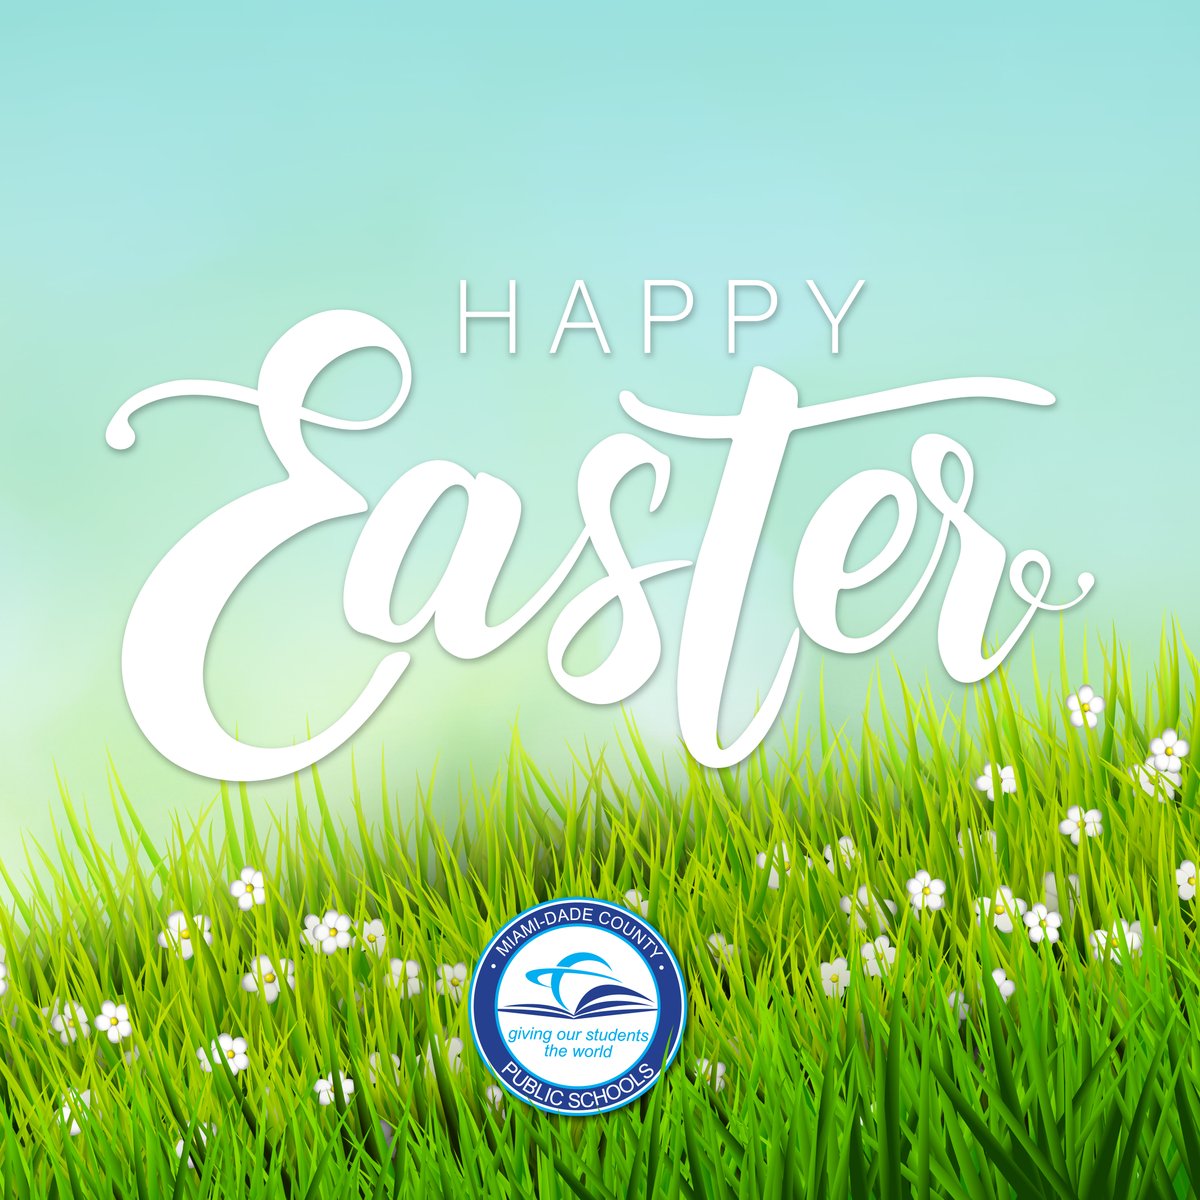 Wishing you a joyful Easter filled with love, laughter, and cherished memories. #HappyEaster